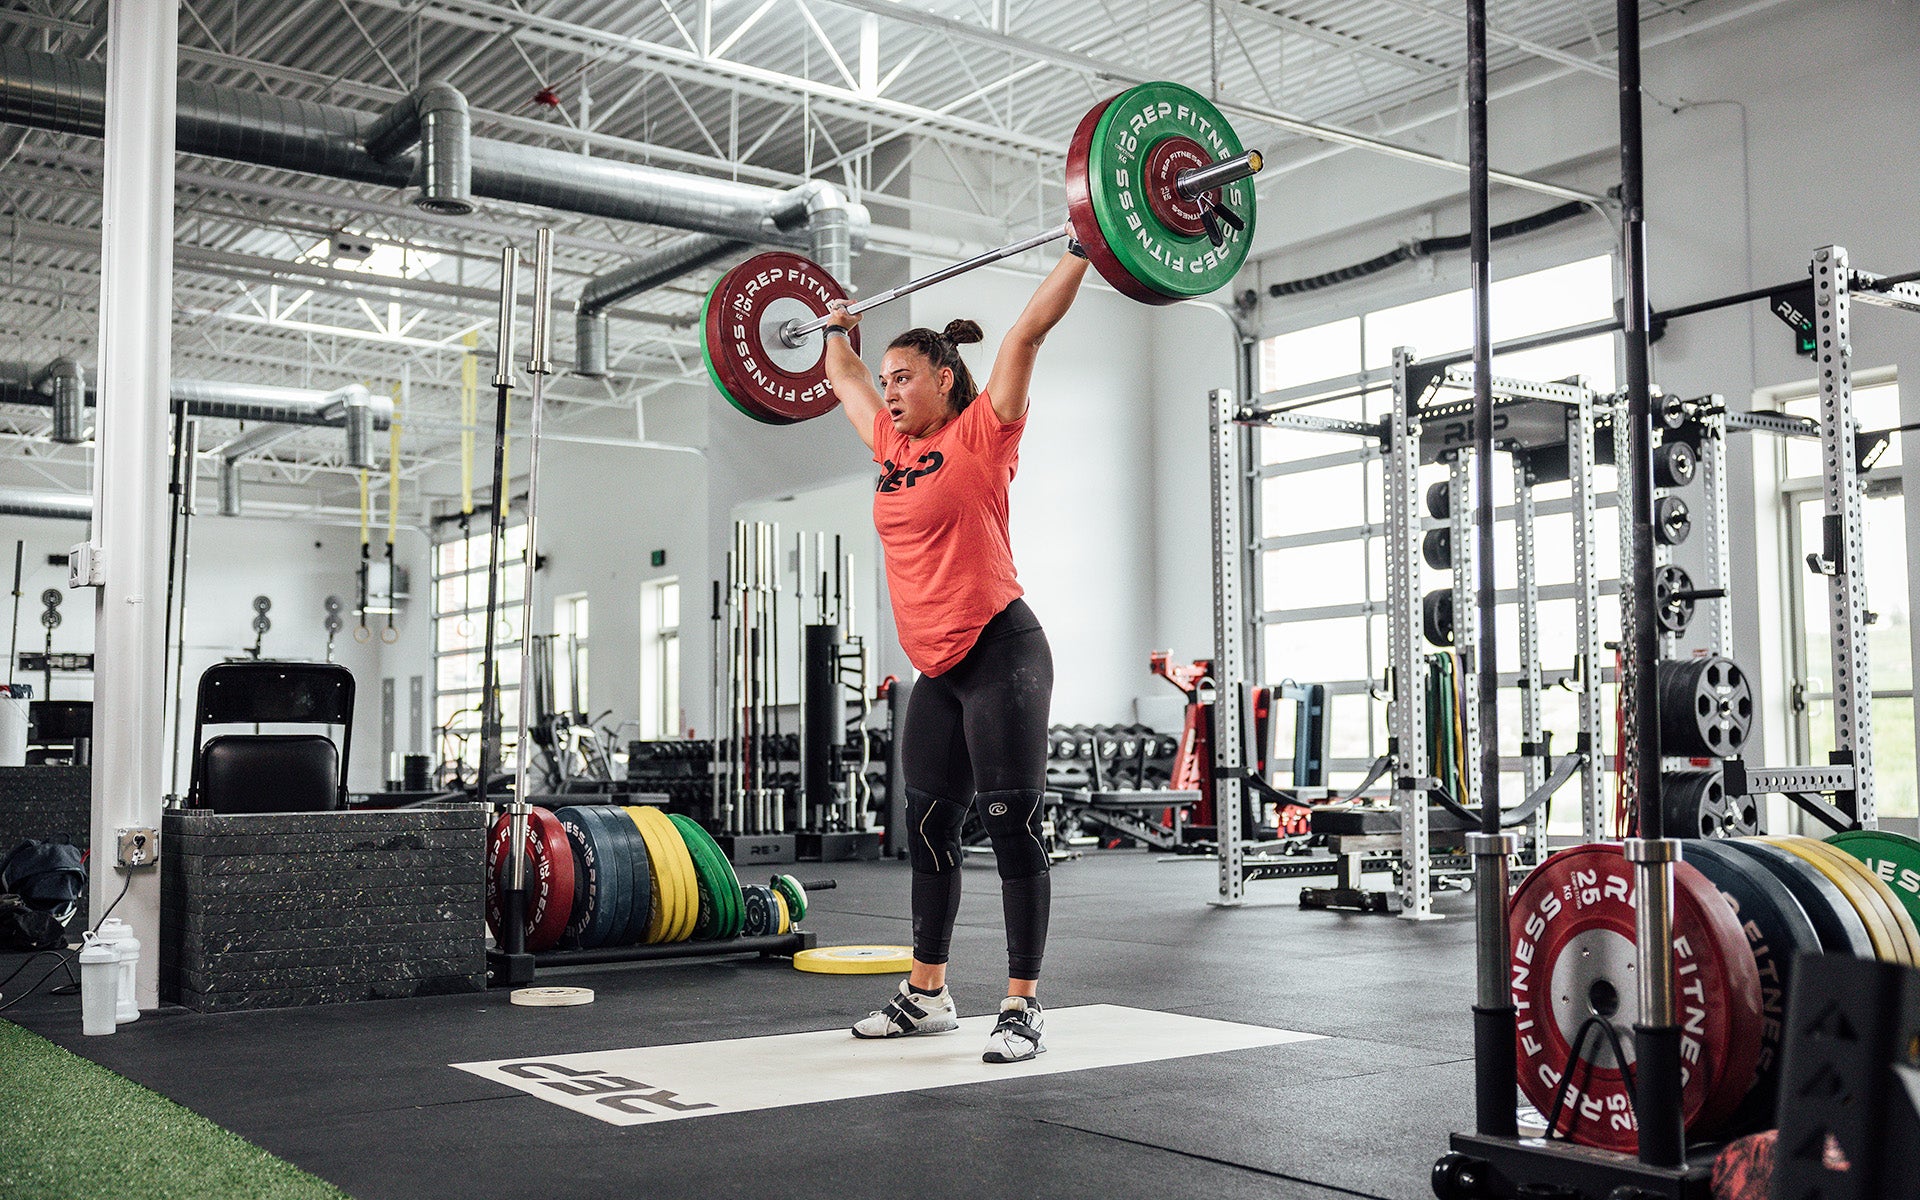 Female lifter performing a snatch on an Olympic lifting platform using REP's 15kg Alpine Weightlifting Bar.